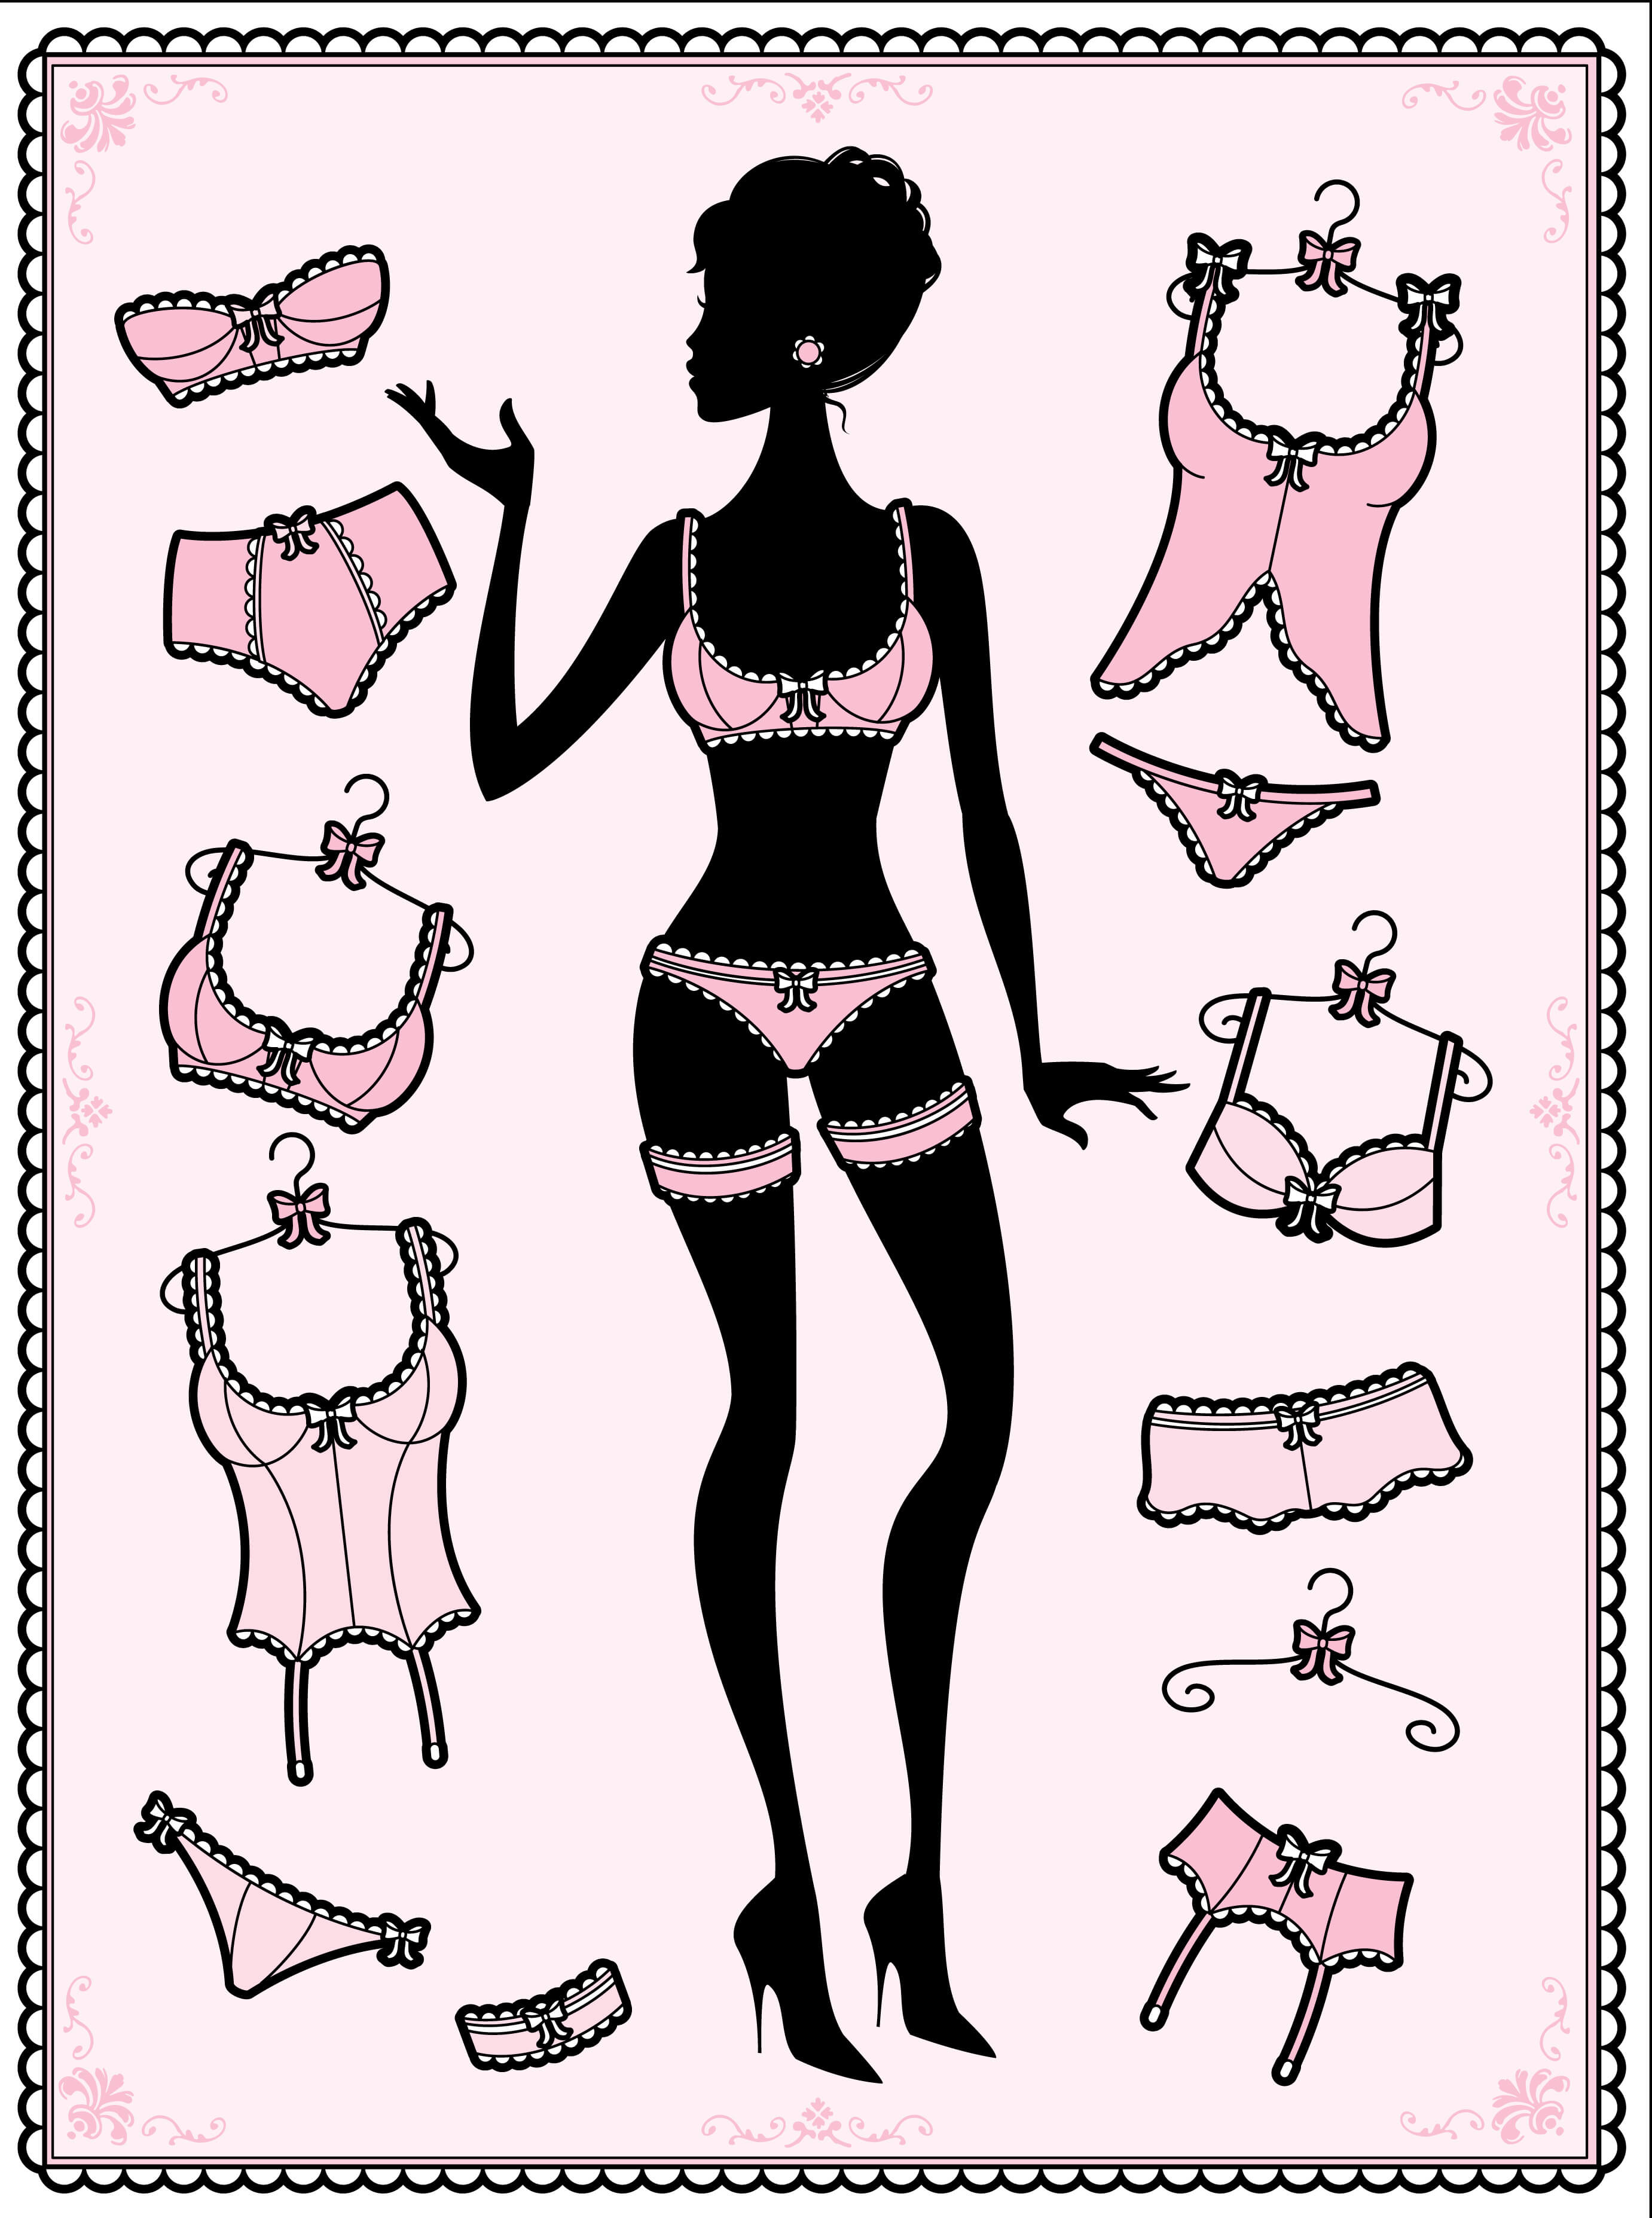 Lady Miss Matched: 7 Ways To Keep Your Daily Lingerie Coordinated